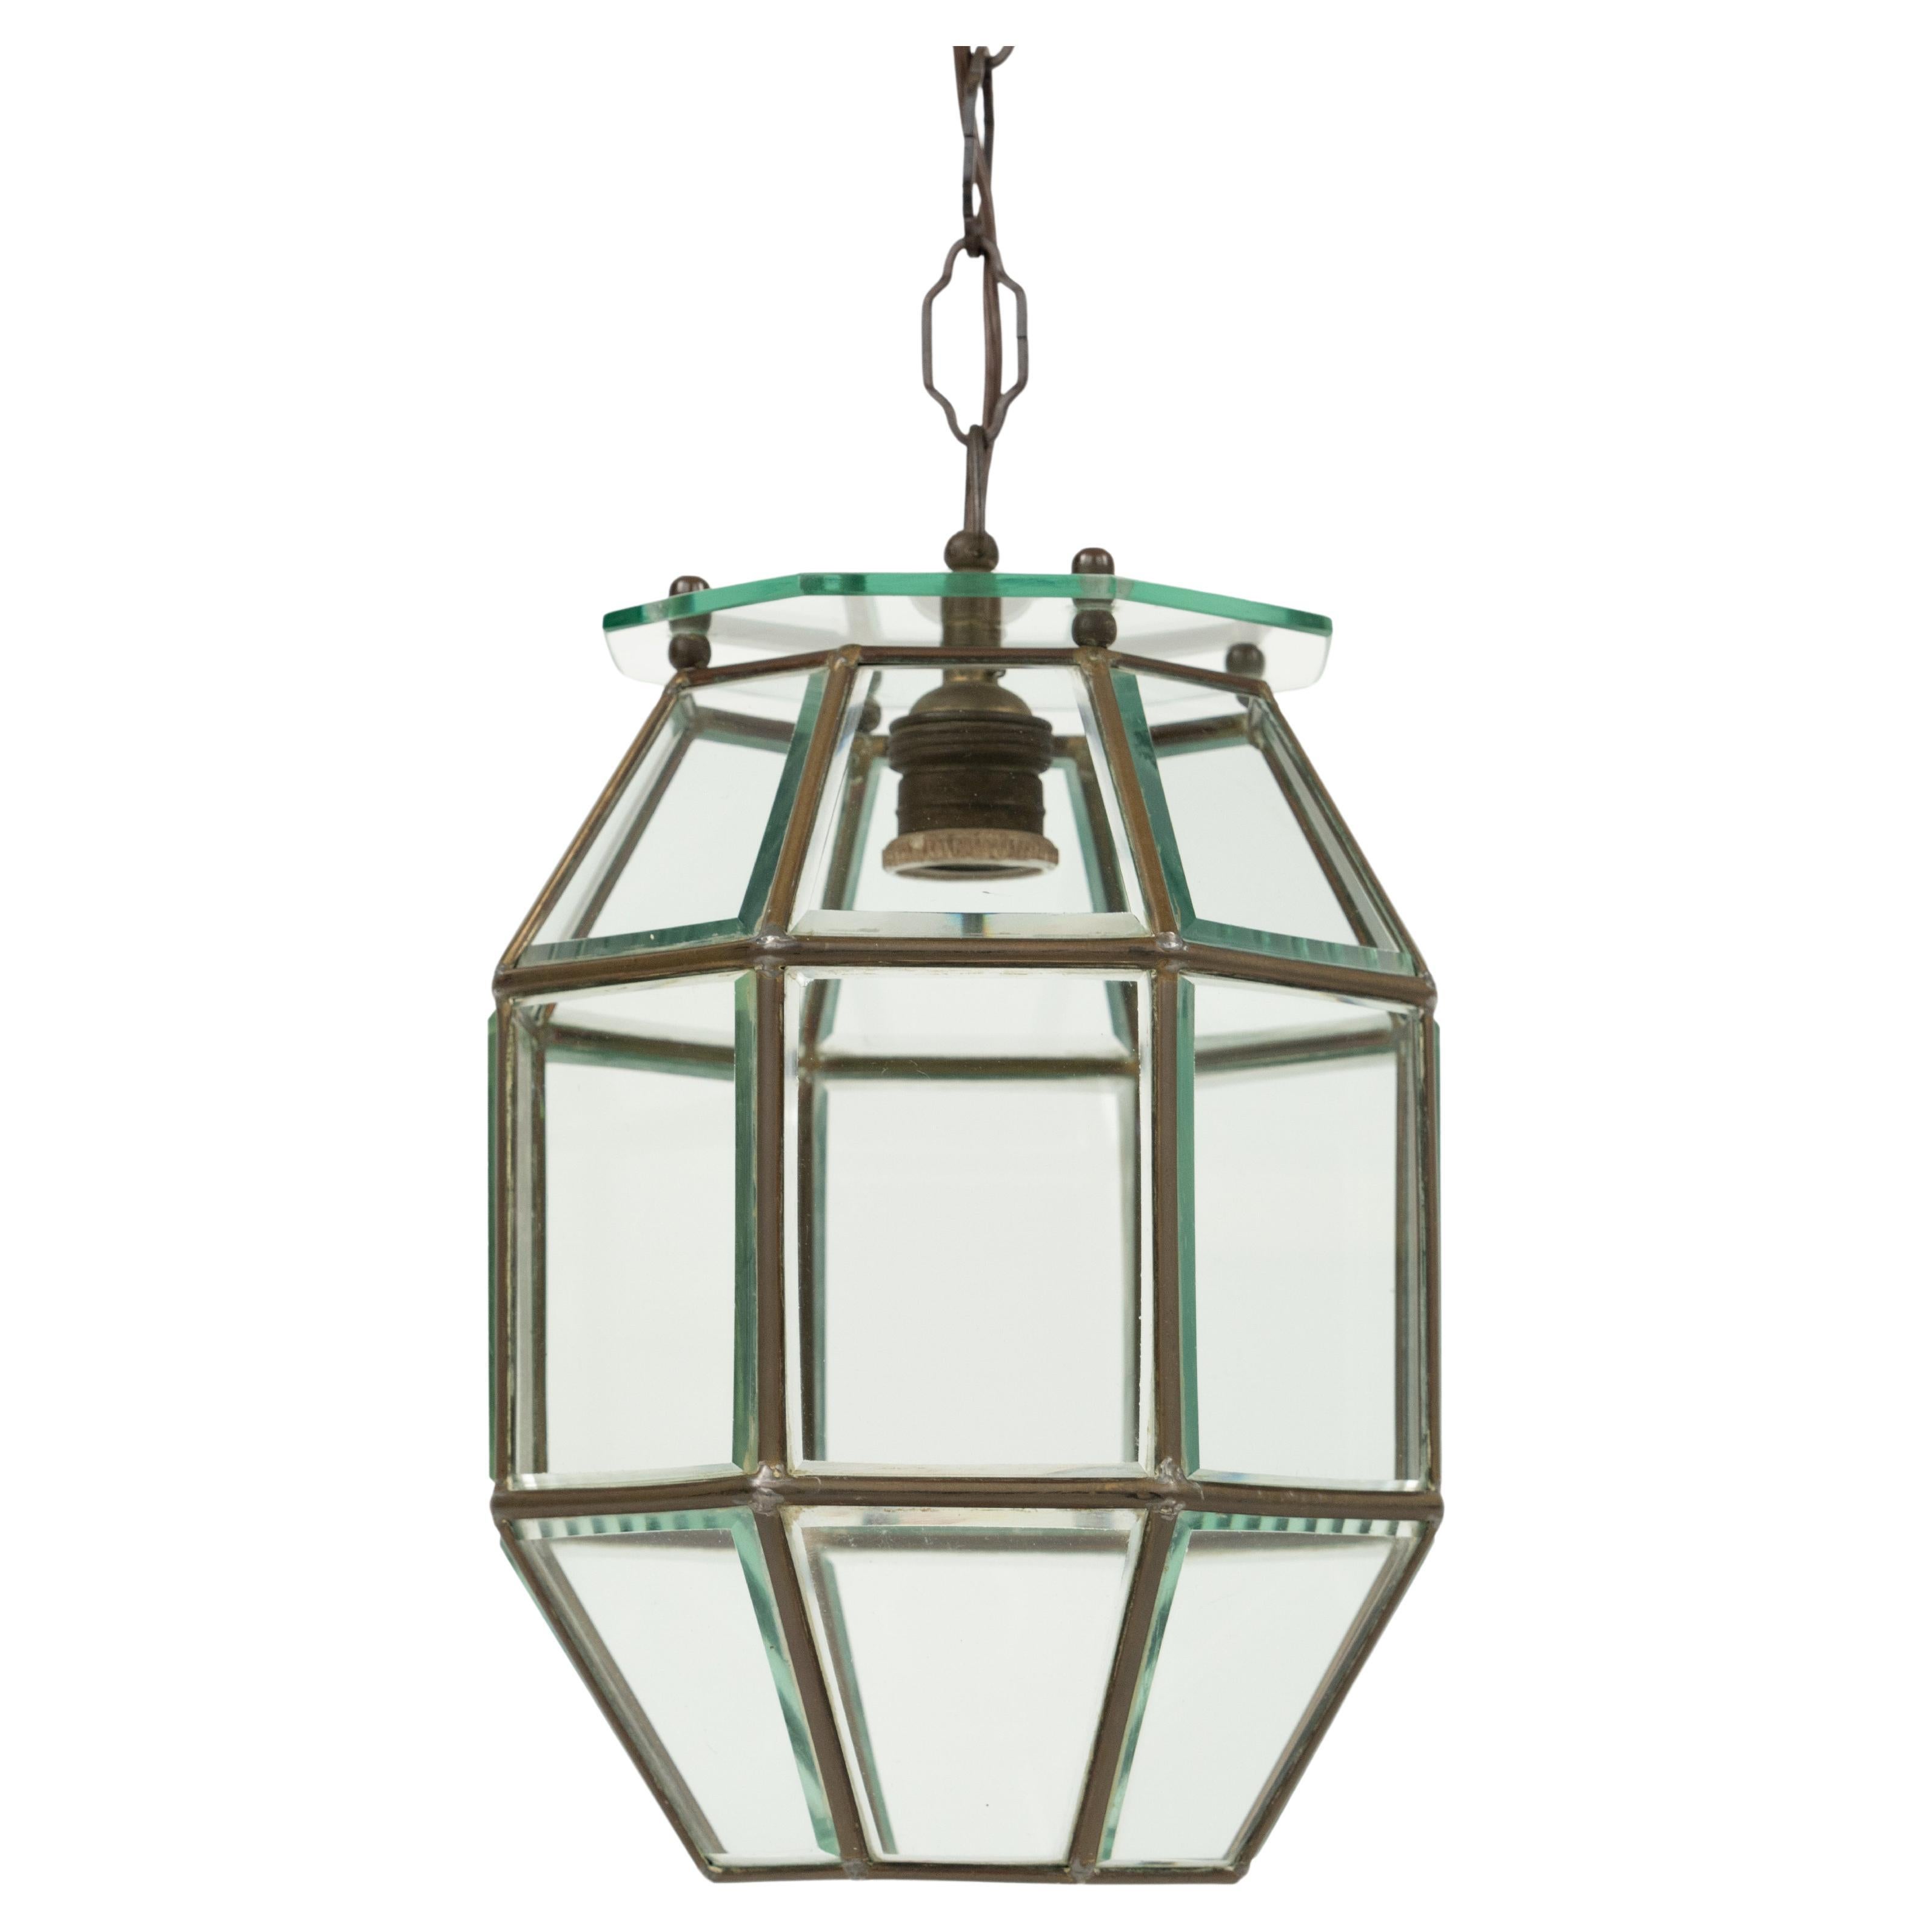 Midcentury amazing octagonal chandelier lantern in brass and beveled glass in the style of Adolf Loos.  

Made in Italy in the 1950s.  

The stunning and clear cut pendant shows twenty-four facetted clear glasses in a brass frame.   

Measures: 